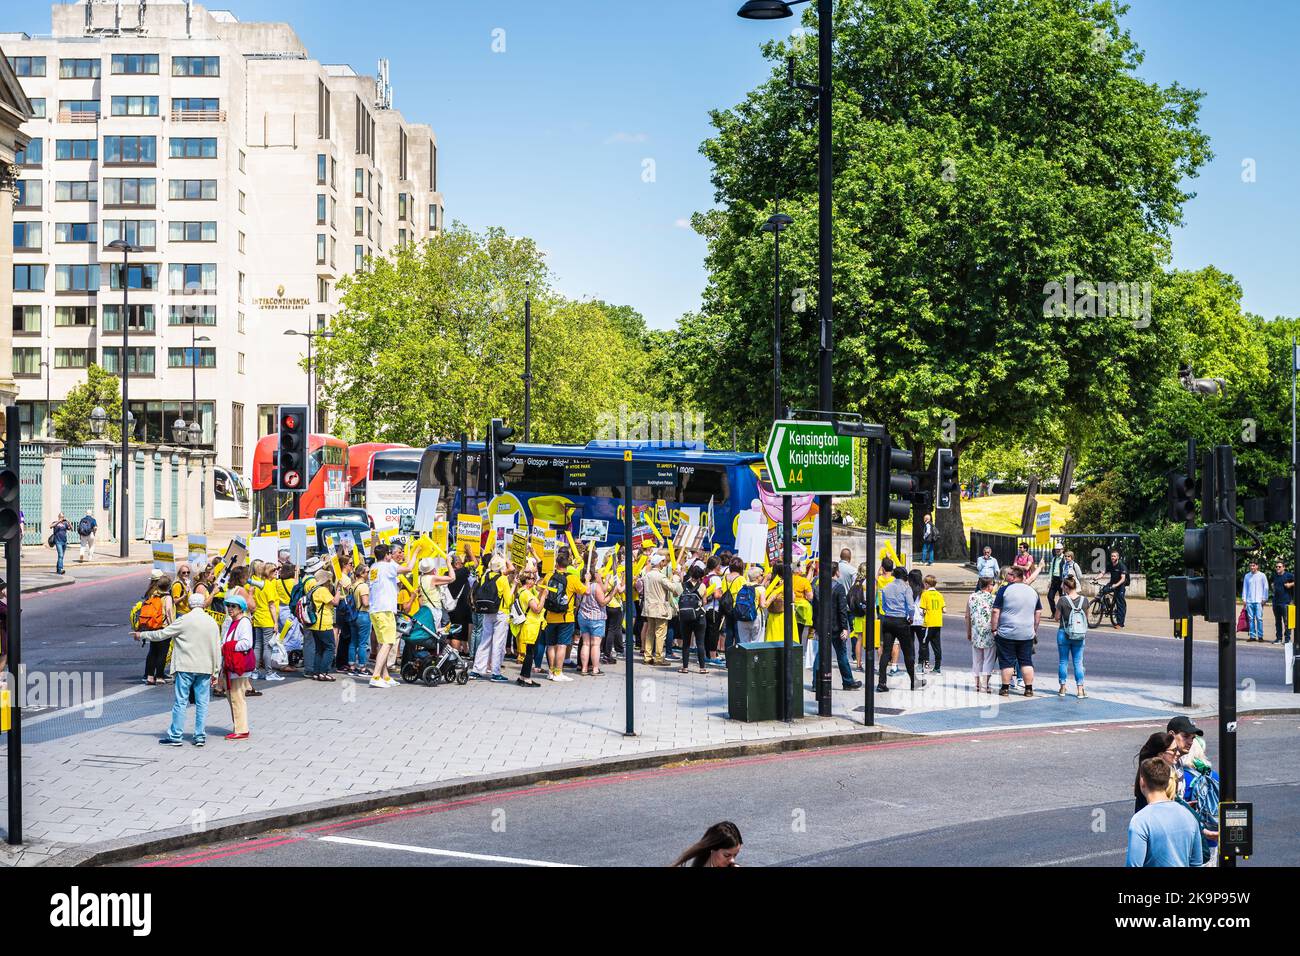 London, United Kingdom - June 22, 2018: People holding signs at Cystic Fibrosis protest in UK England to make Orkambi medicine drug free Stock Photo